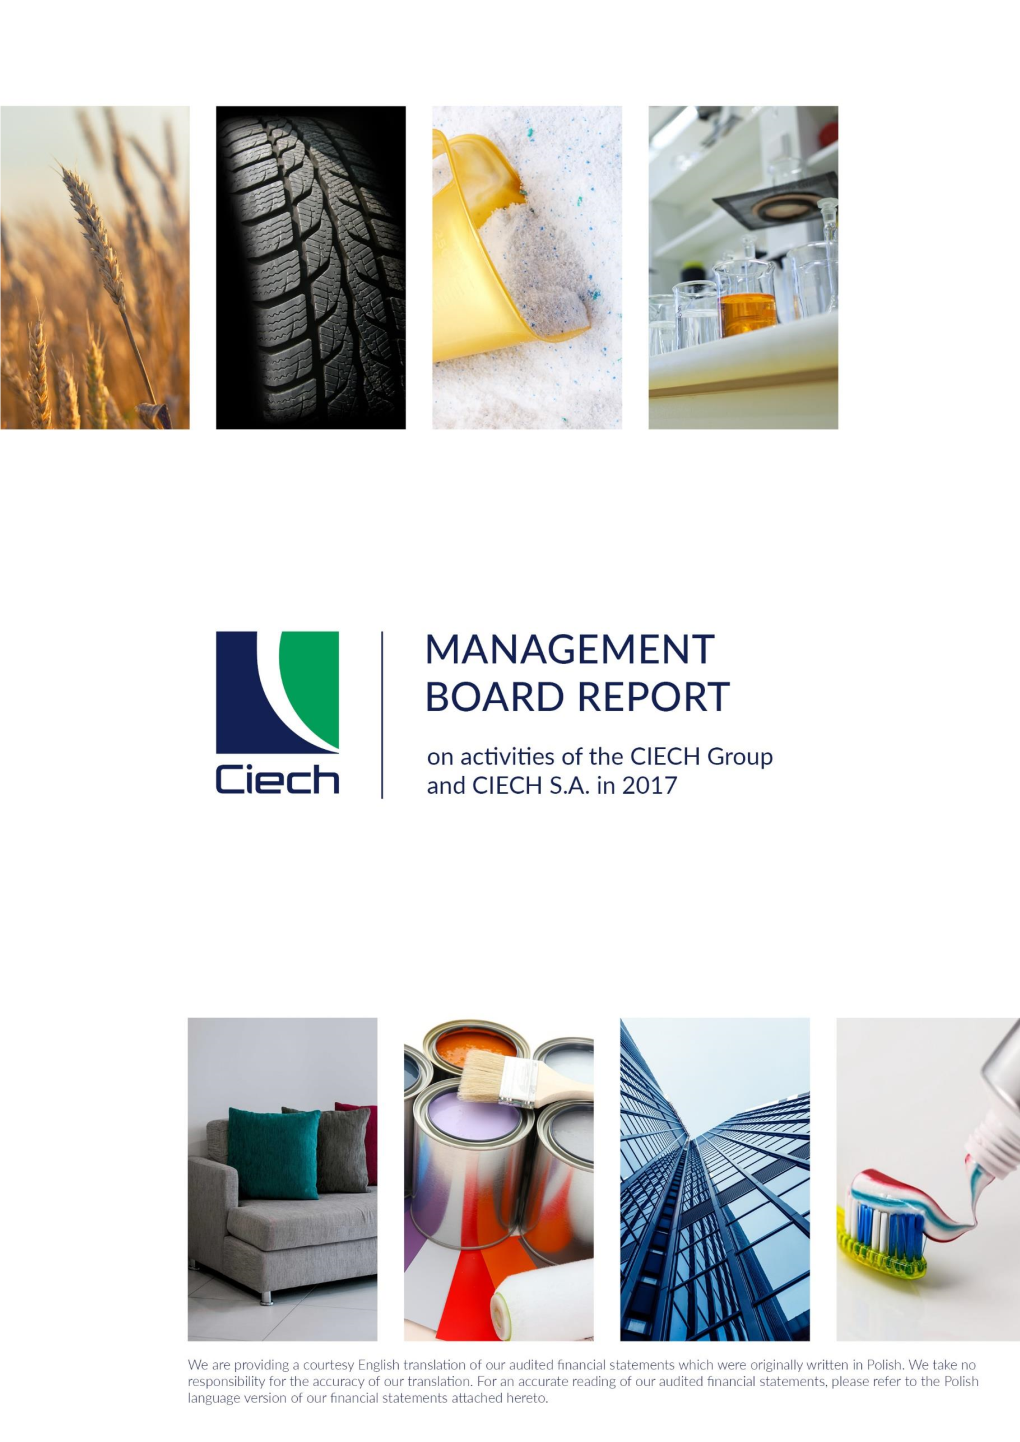 Pdf Management Board Report on Activities of the CIECH Group And